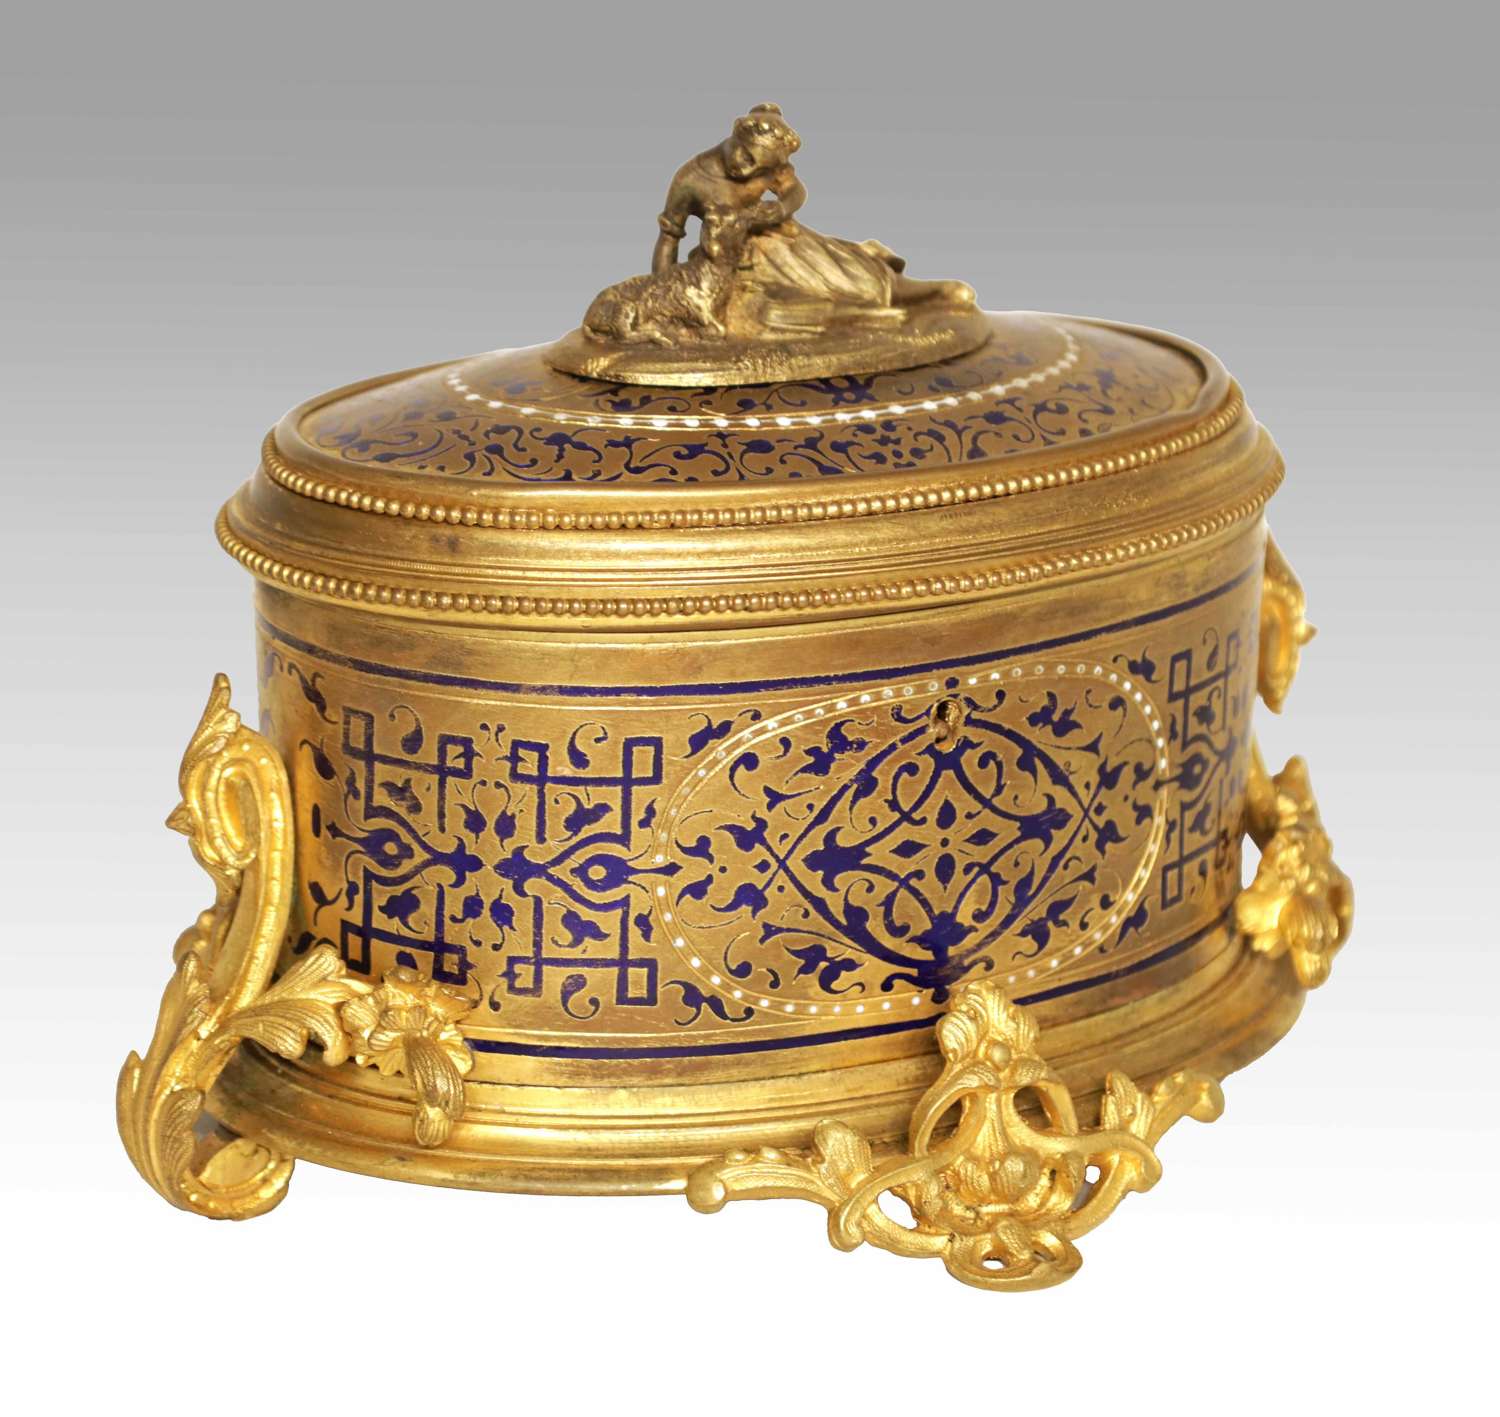 A 19th Century French Oval Champleve Enamel and Ormolu Table Casket